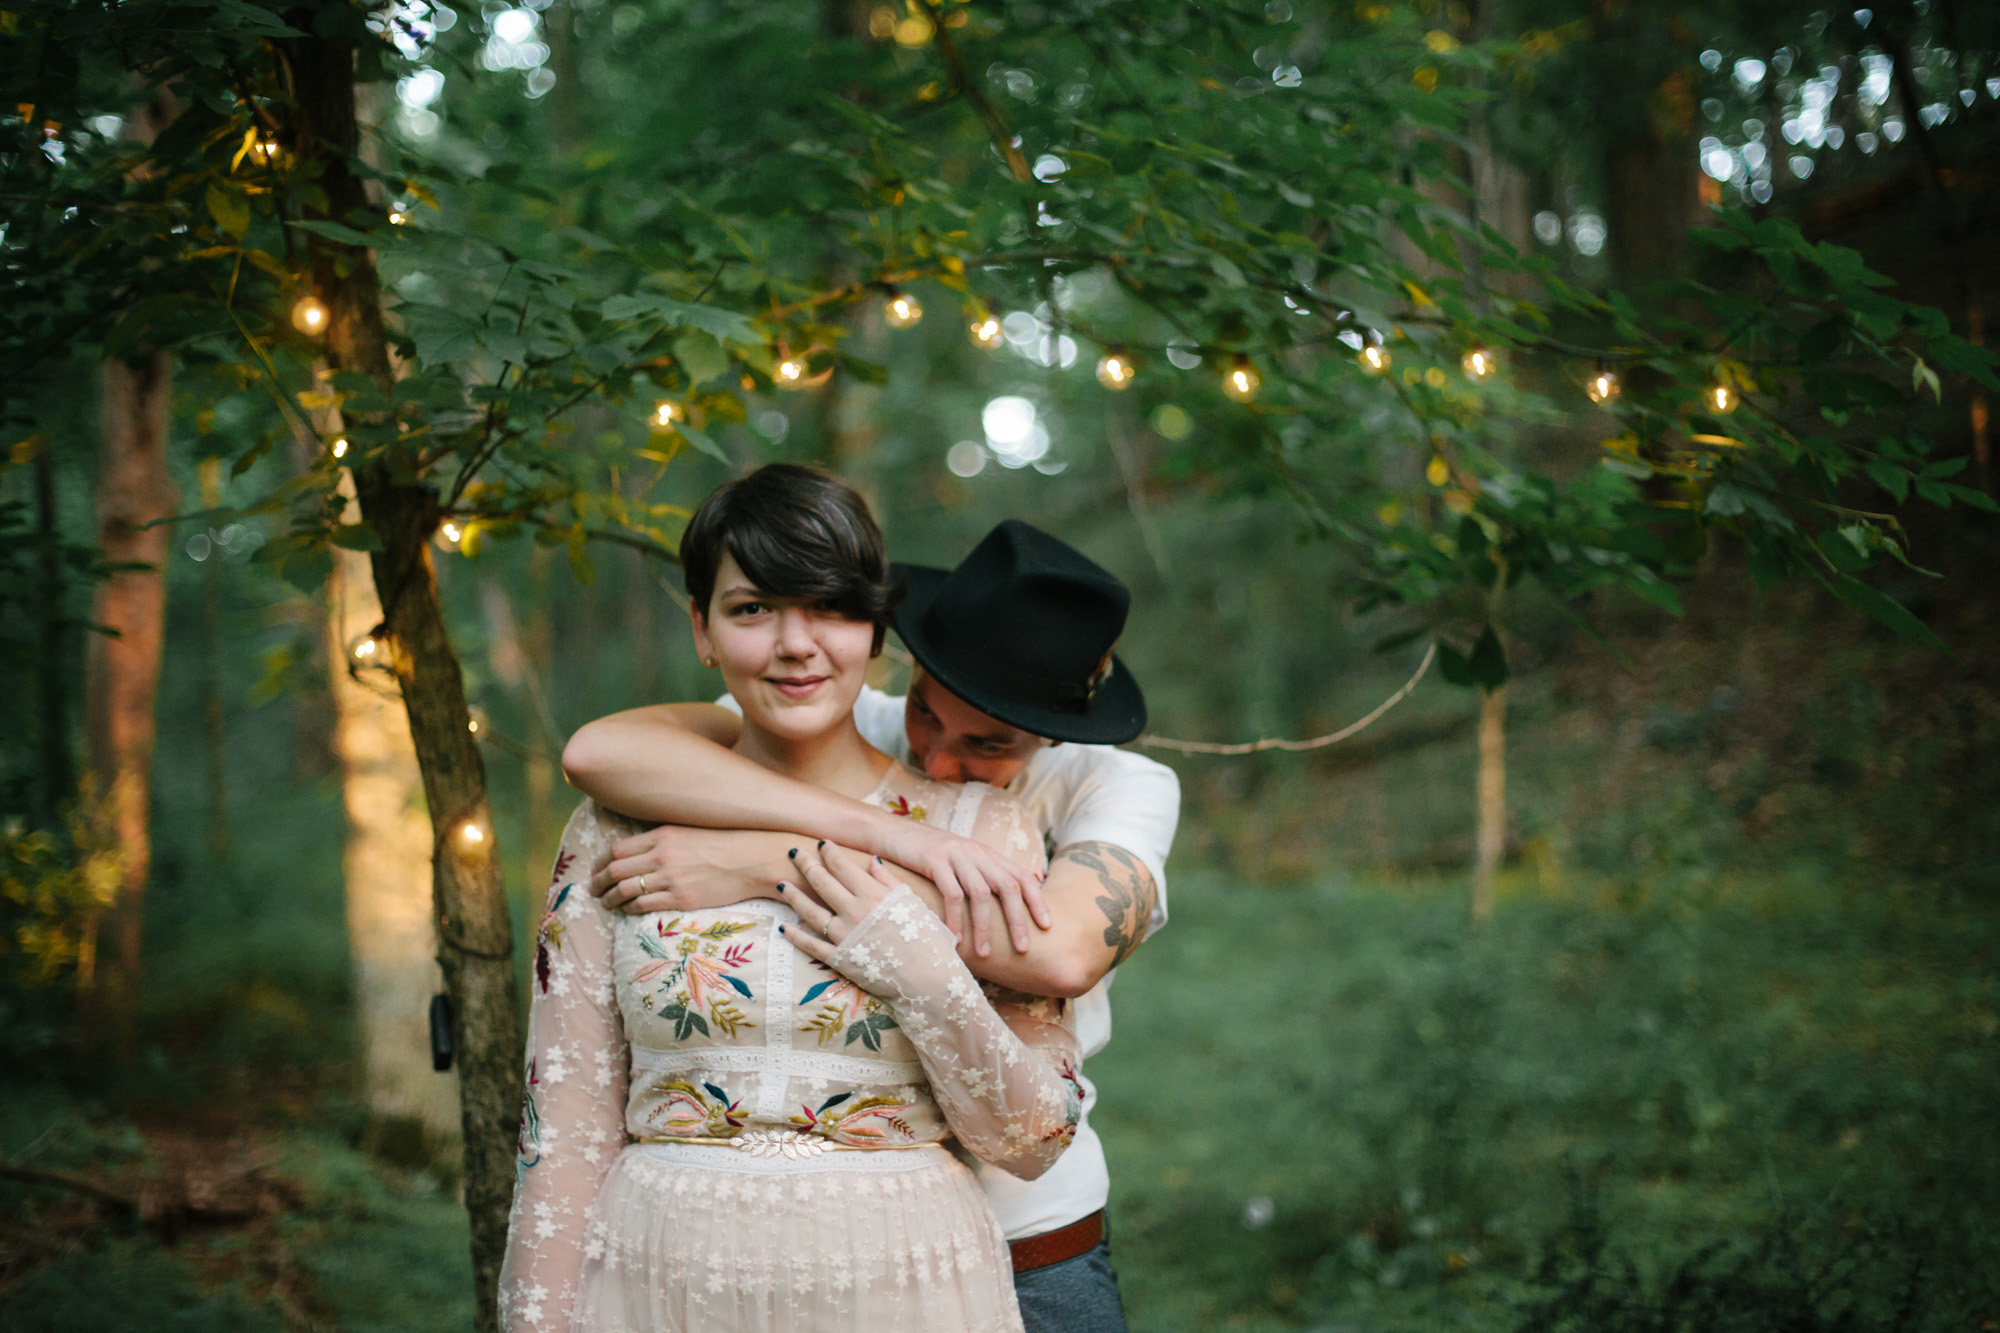  Adventurous woodland elopement in Charlottesville, VA with only the couple and their dachshund dogs. Embroidered wedding dress, wildflower inspired bouquet, and handwritten vows. Sarah Mattozzi Photography. 